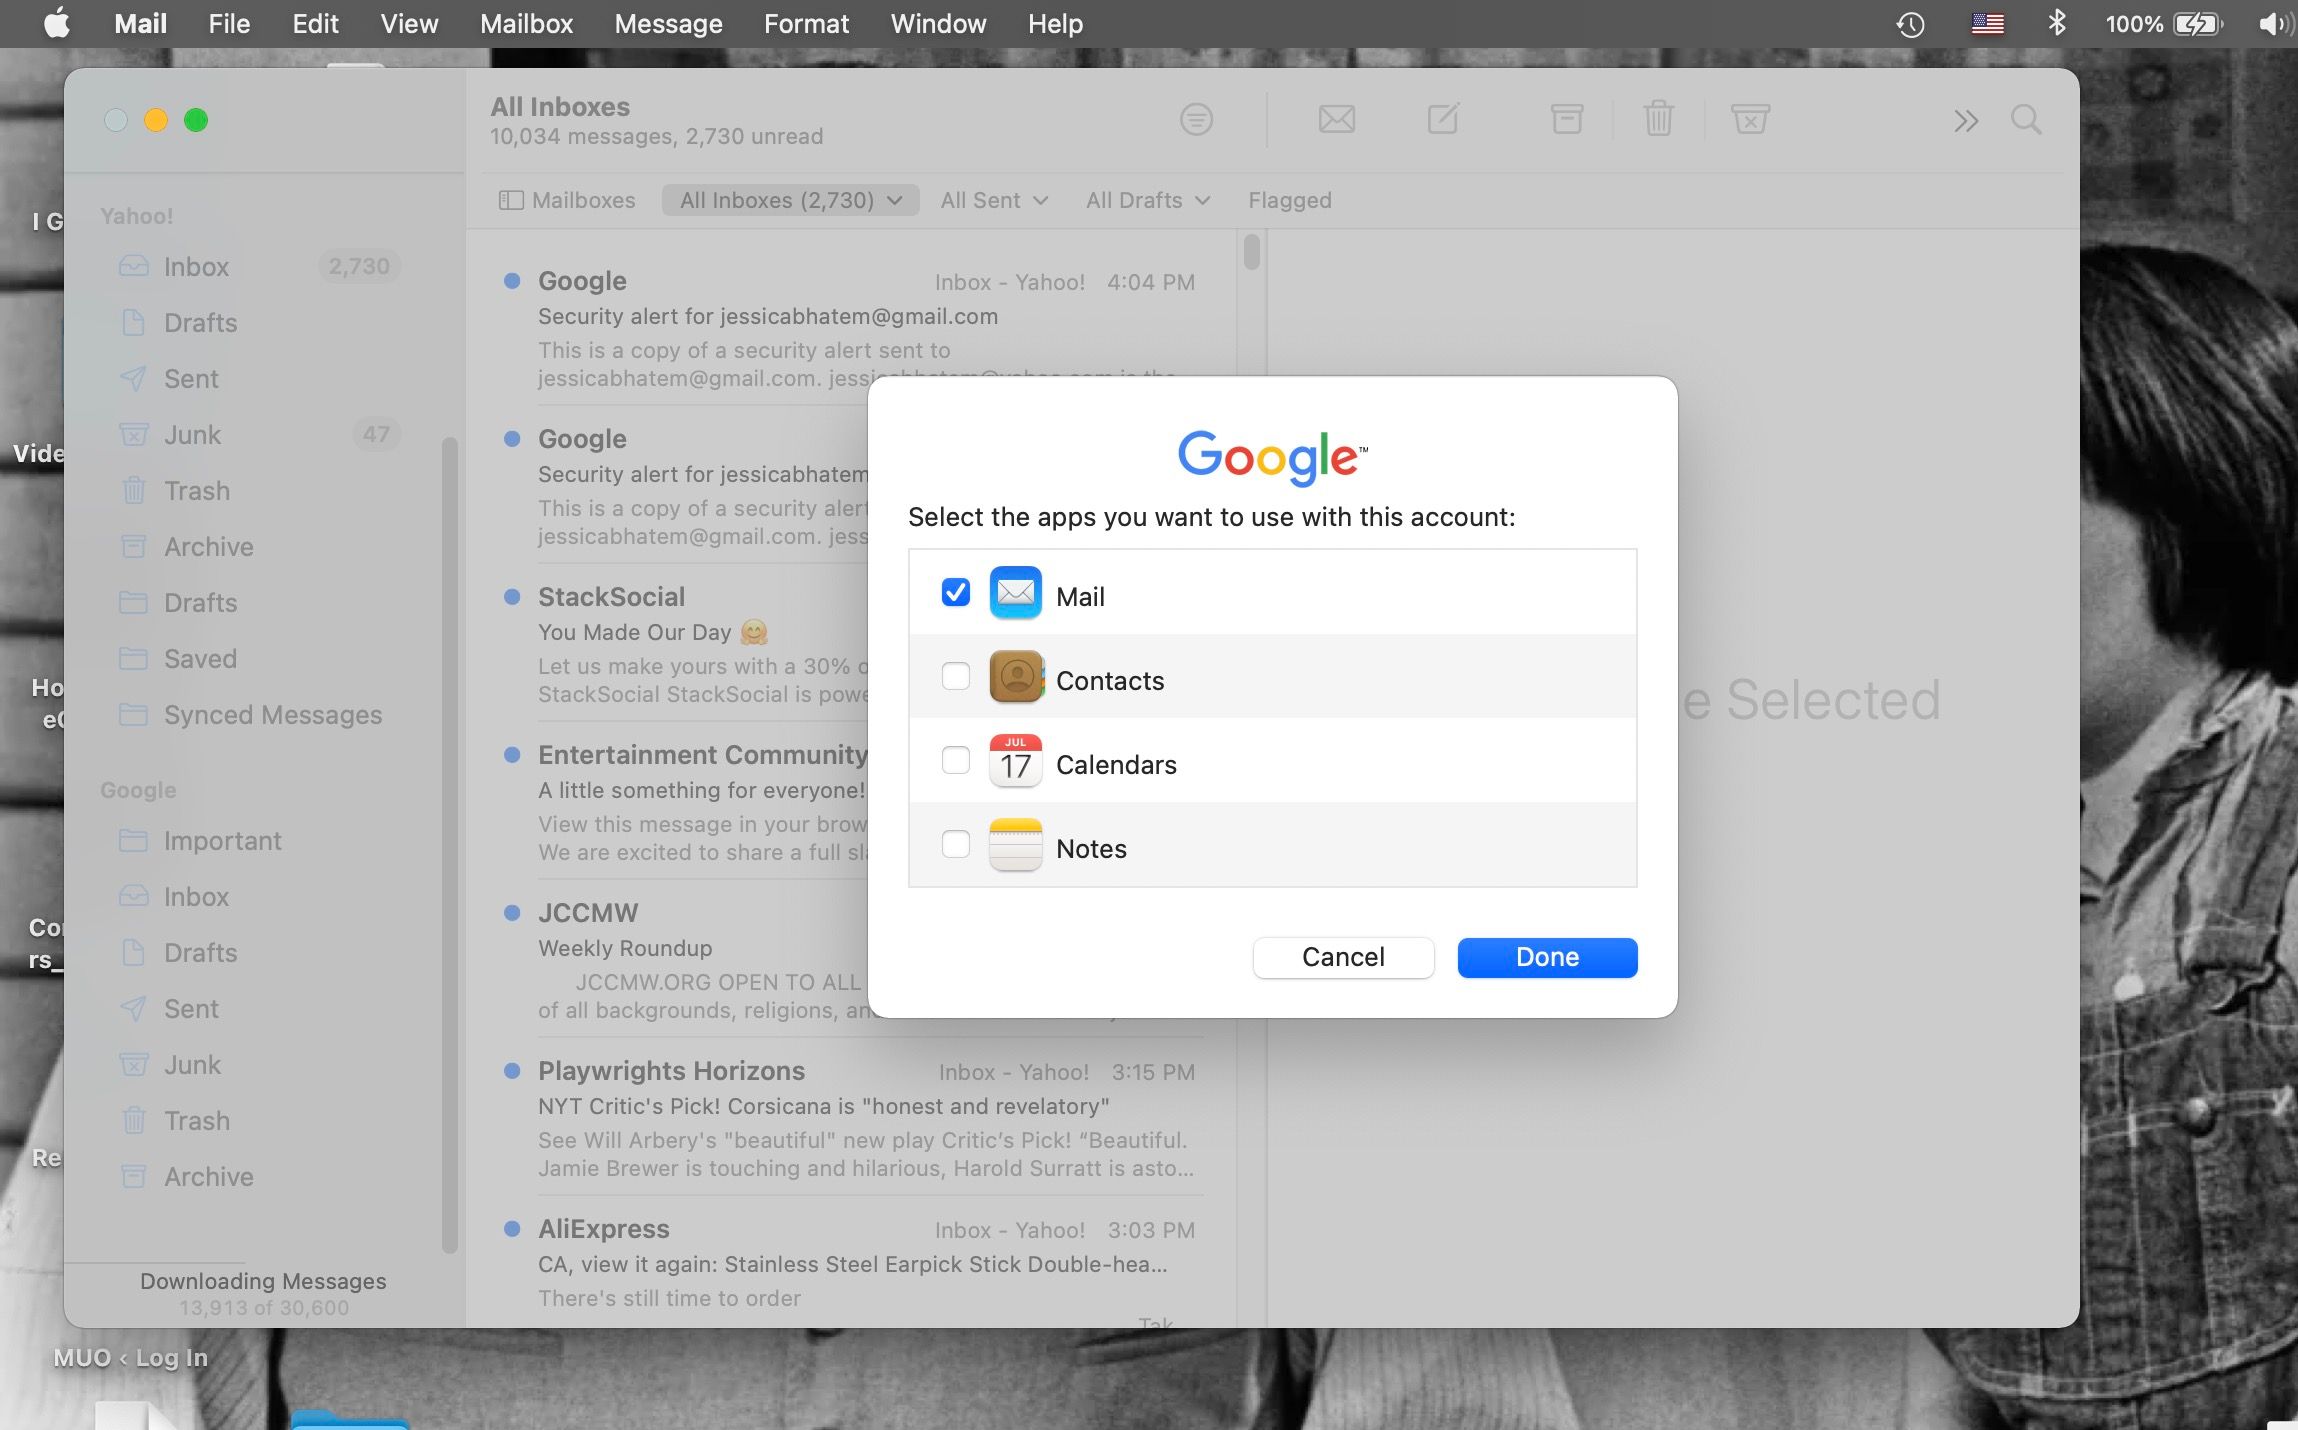 A window in Mail on Mac asking what apps the user would like to give account permissions to other than Mail